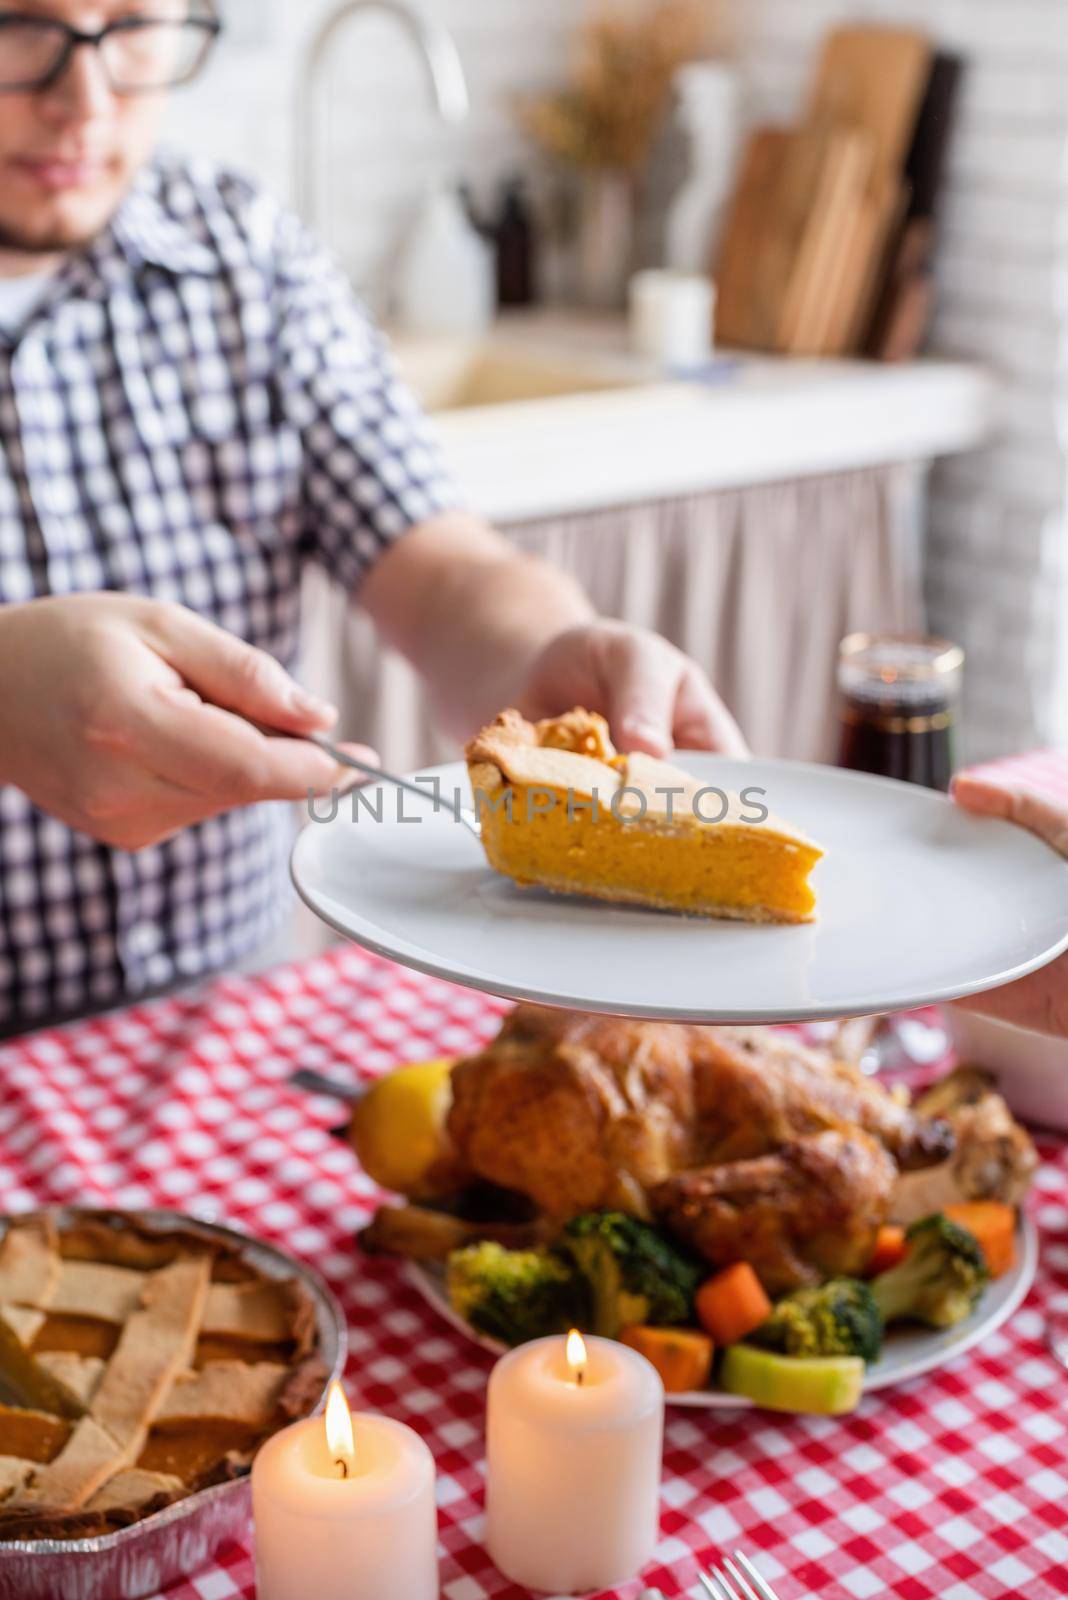 woman and man eating thanksgiving dinner at home kitchen by Desperada